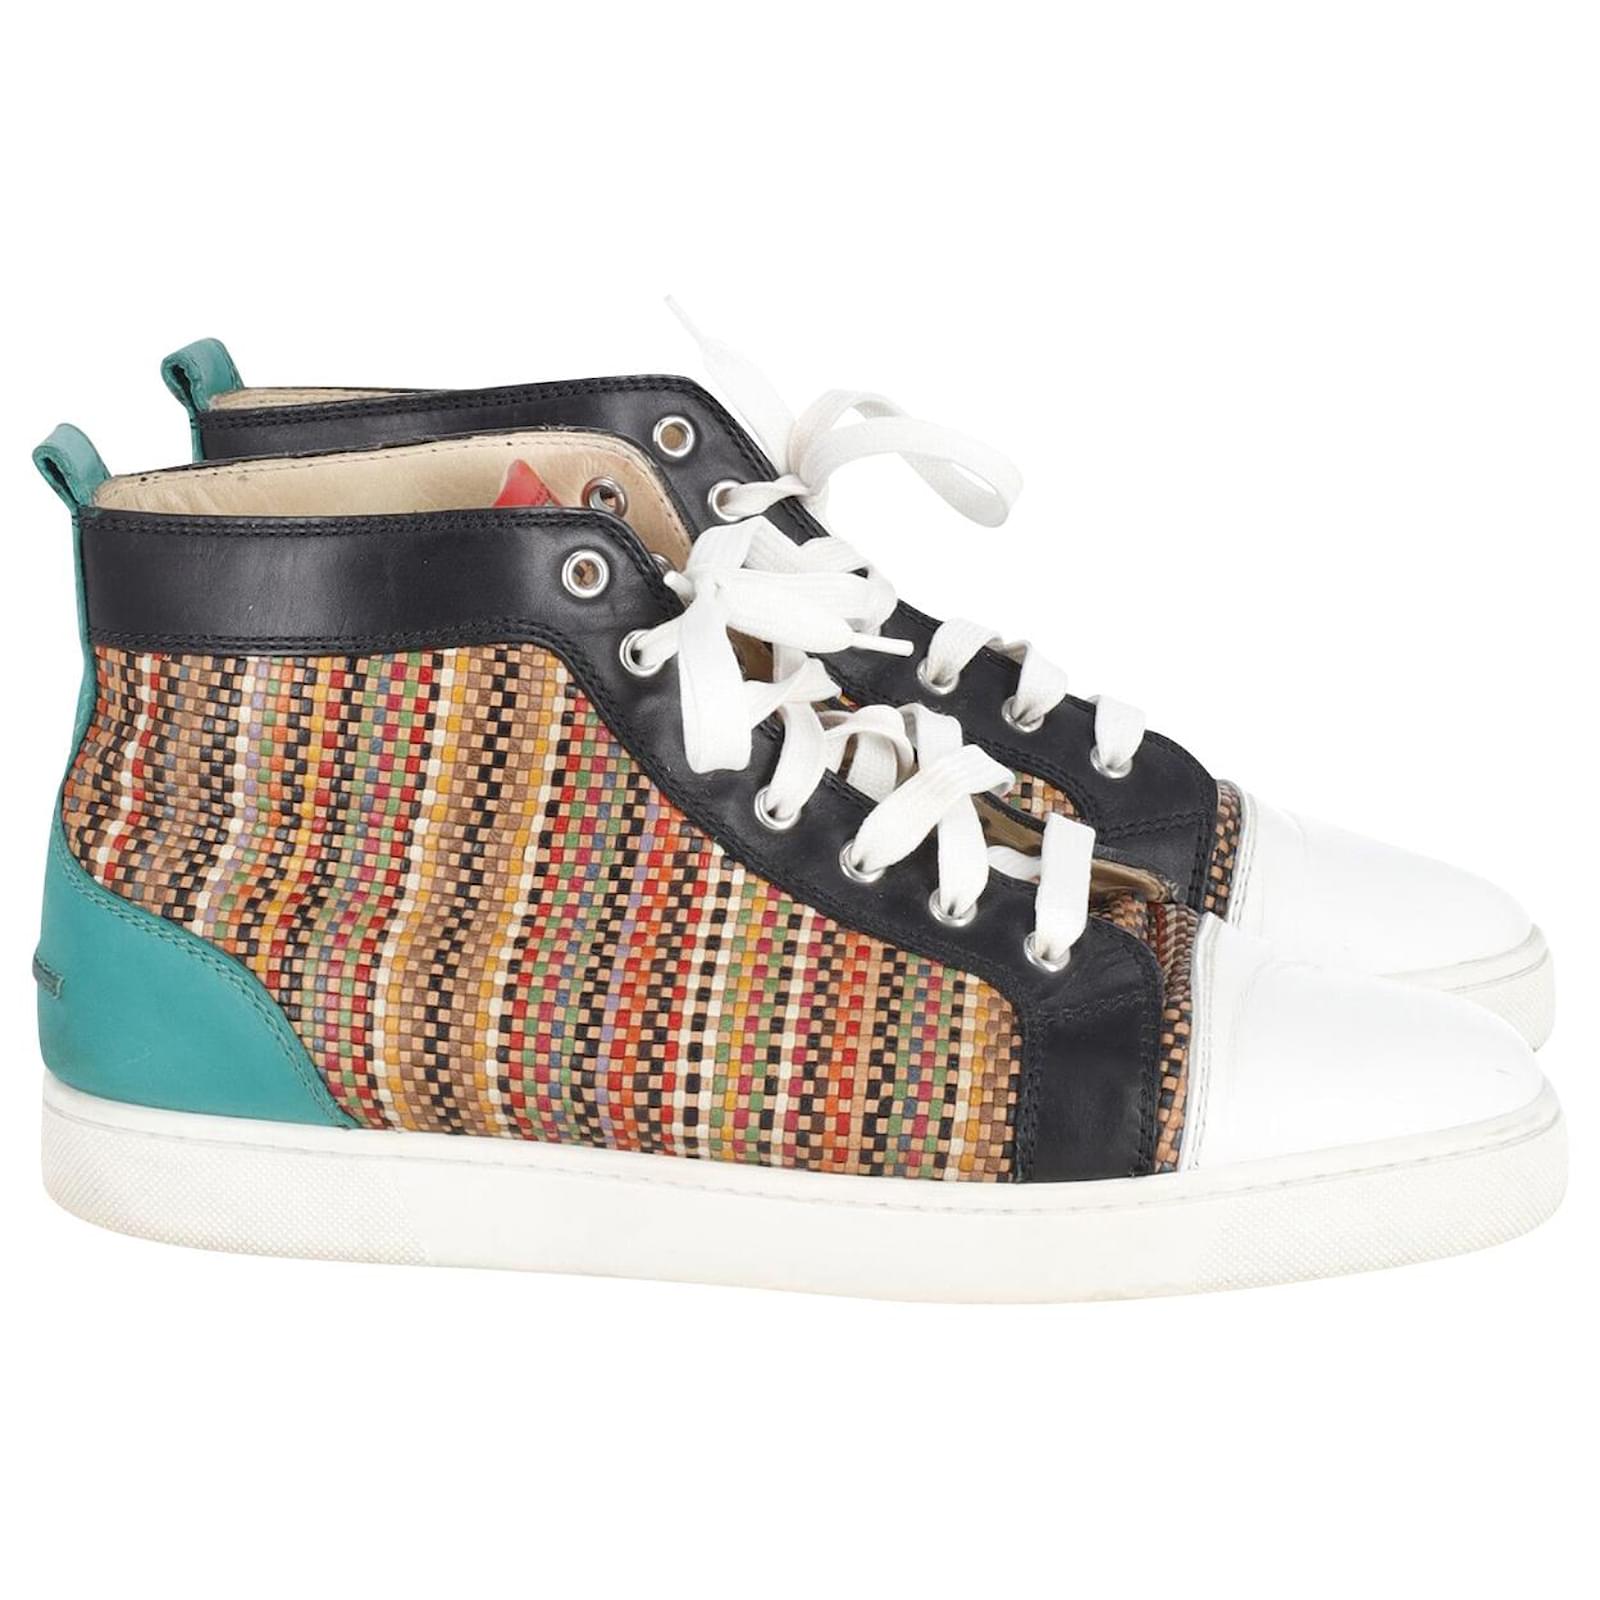 Christian Louboutin Louis Orlato High-Top Sneakers in Multicolor